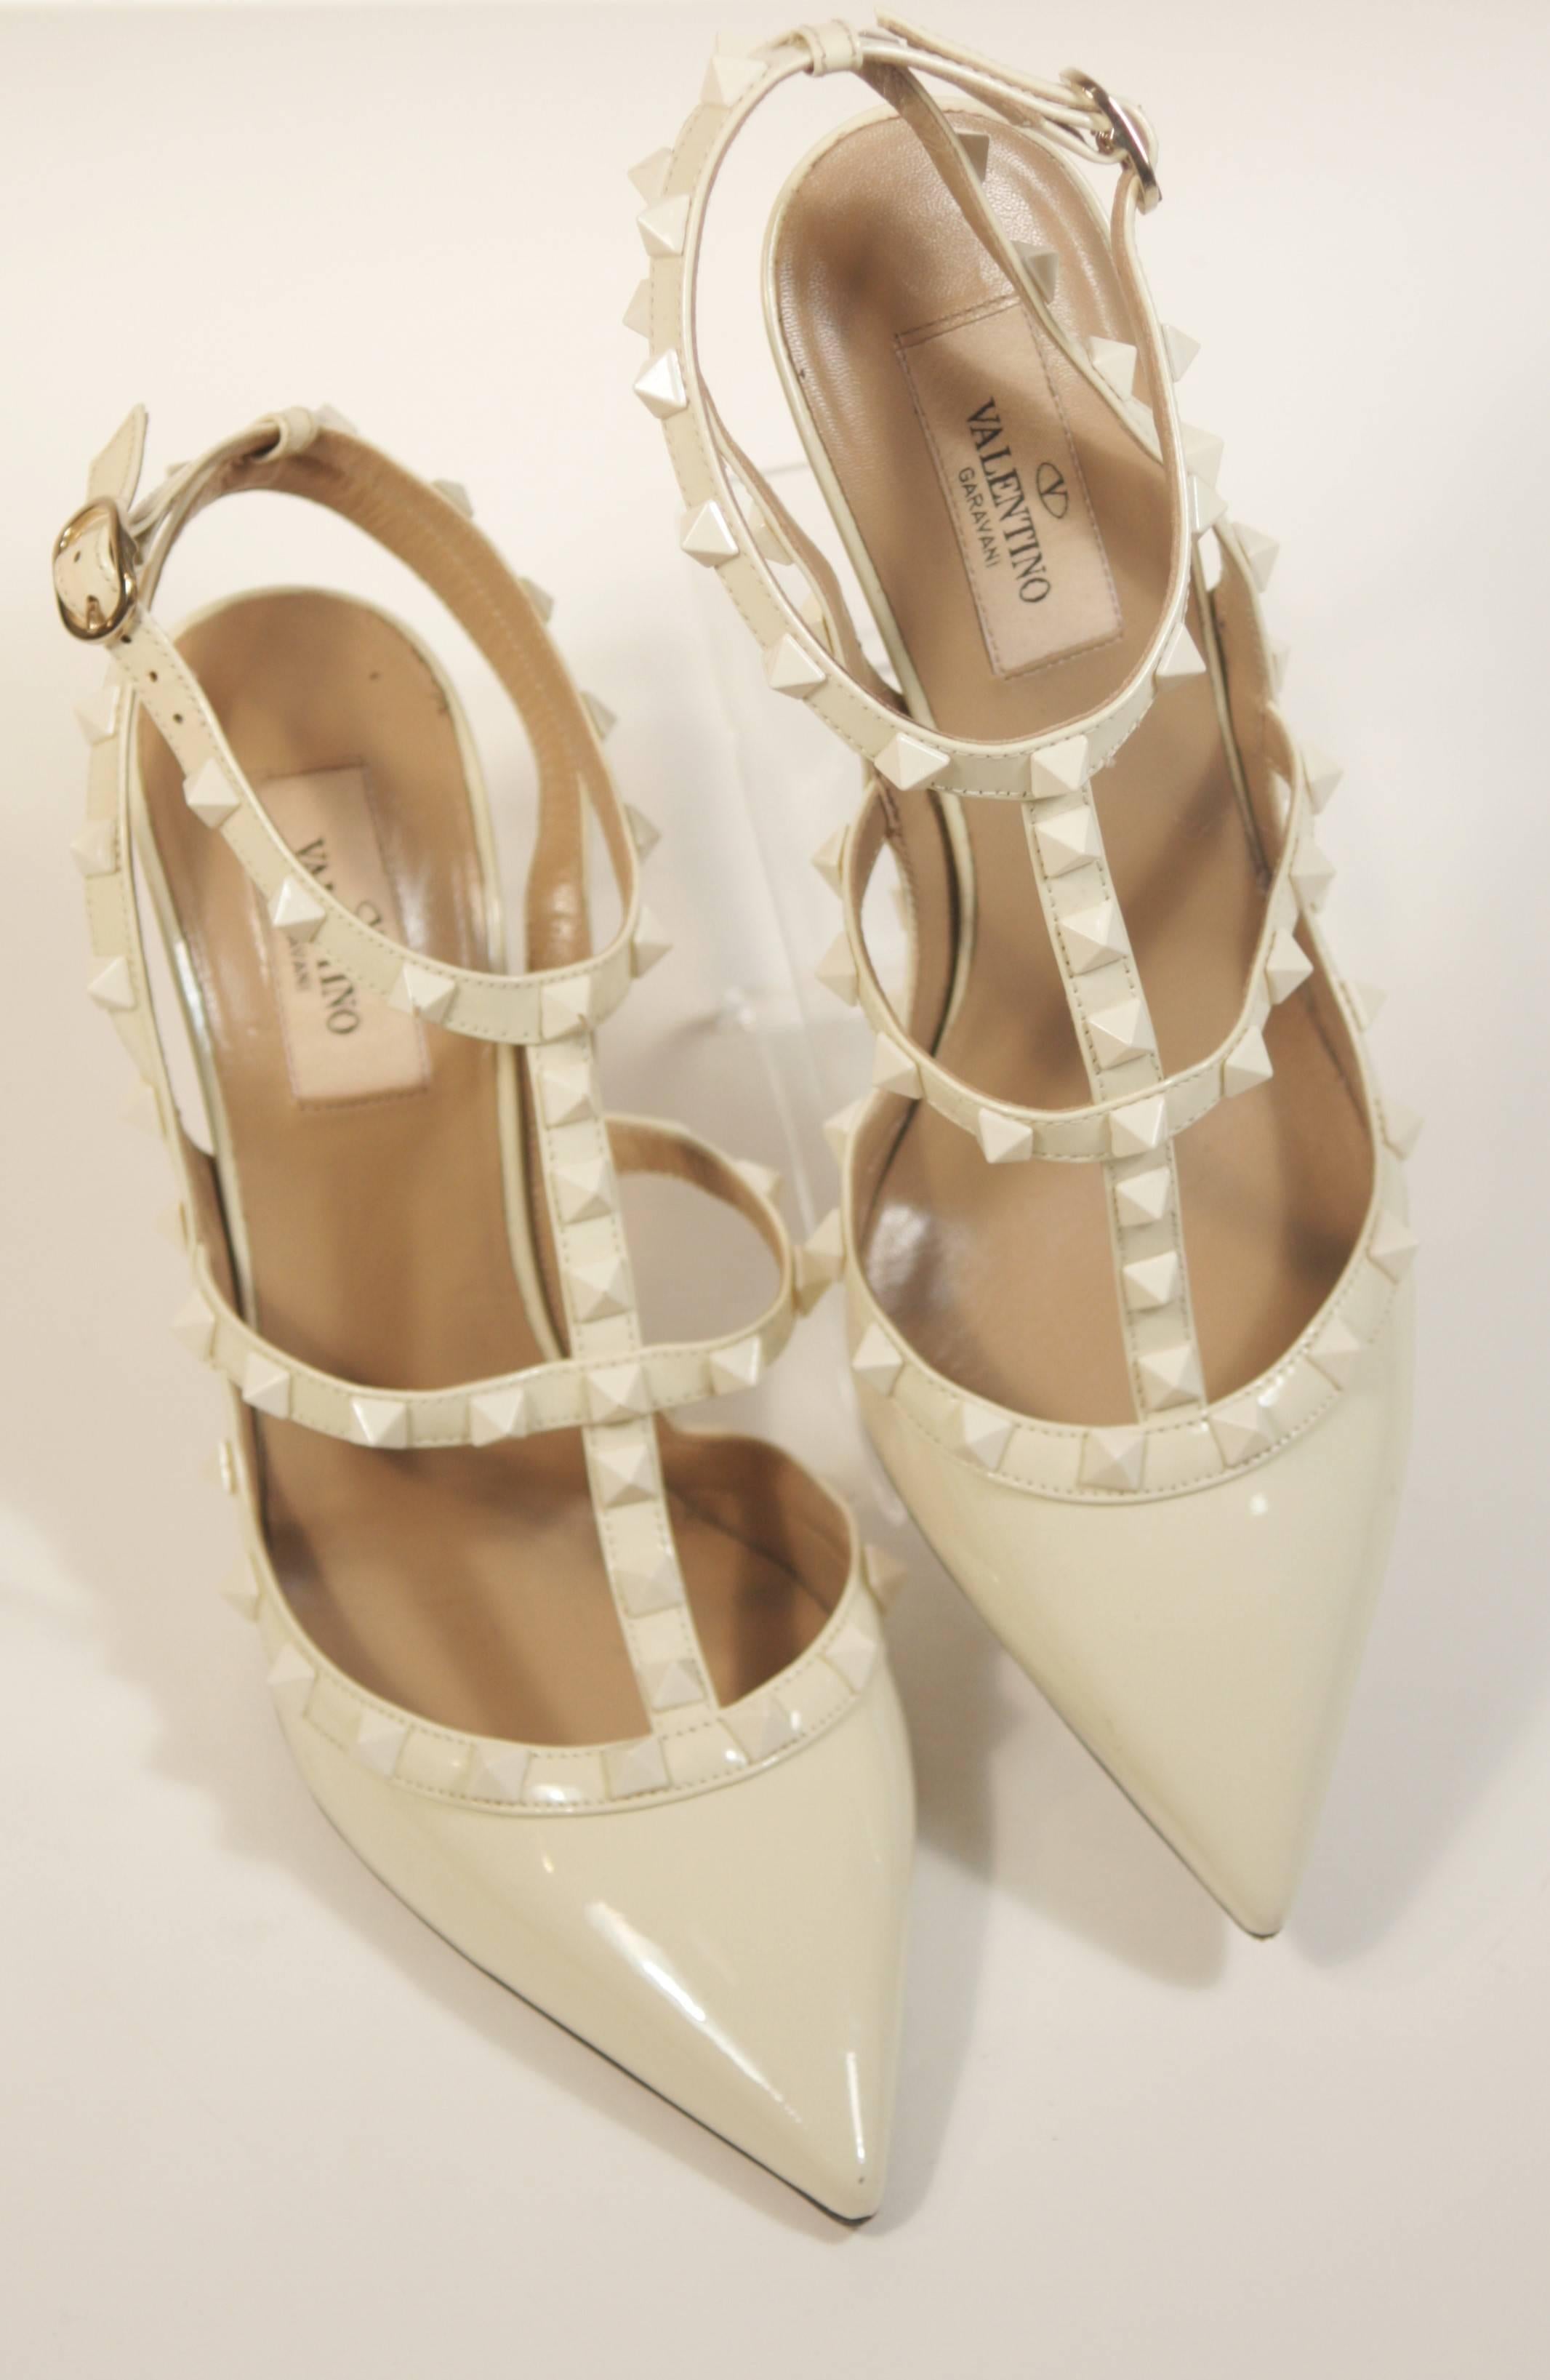 This Valentino design is available for viewing at our Beverly Hills Boutique. We offer a large selection of evening gowns and luxury garments. 

 These Valentino pumps are composed of an ivory hue patent leather, called 'Bone'. Features studded